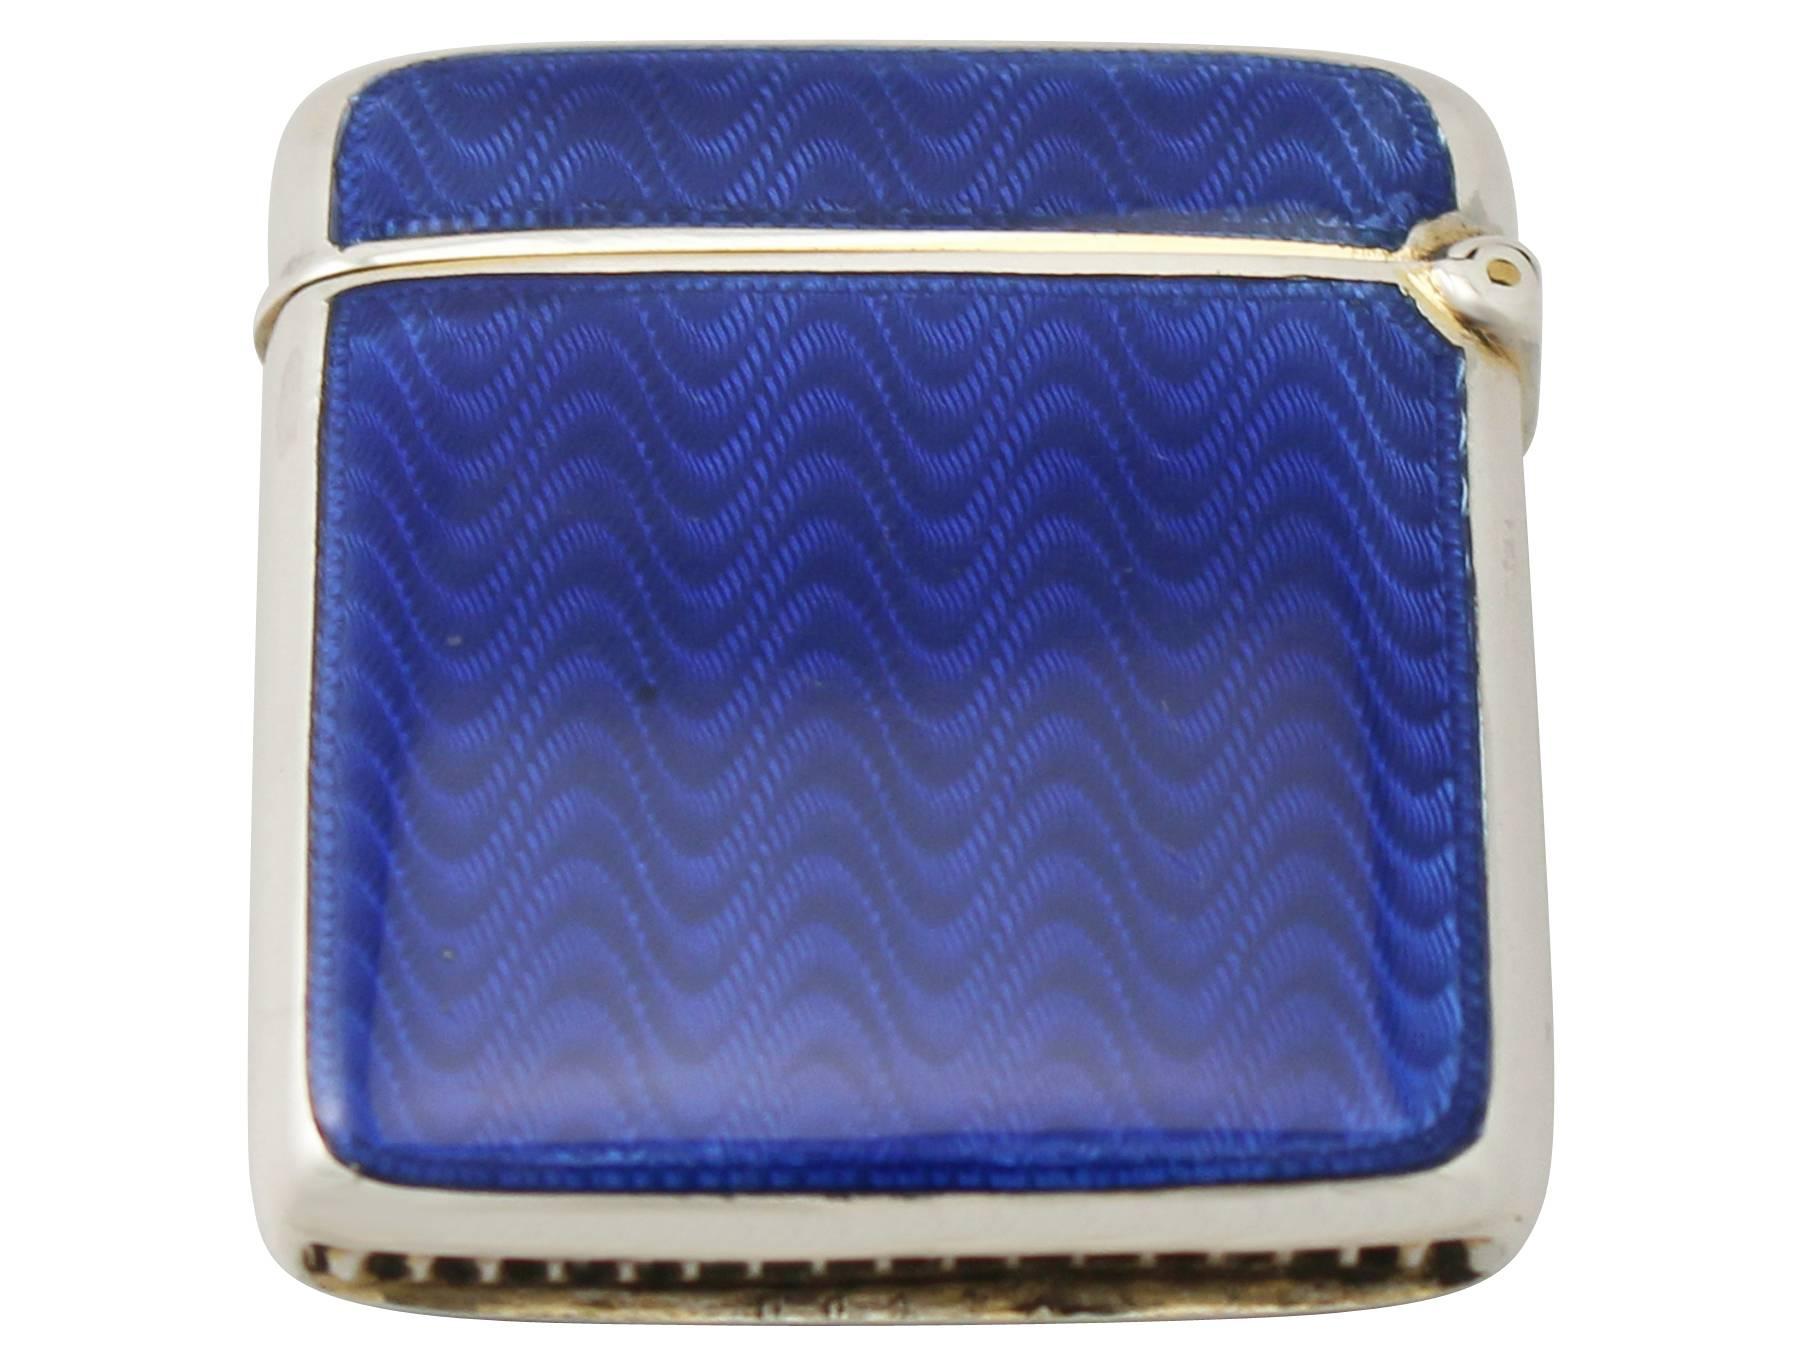 A fine antique sterling silver and guilloche enamel vesta case: part of our enameled silver collection

This fine antique sterling silver and guilloche enamel vesta case has a plain square shaped form with rounded corners.

The front and reverse